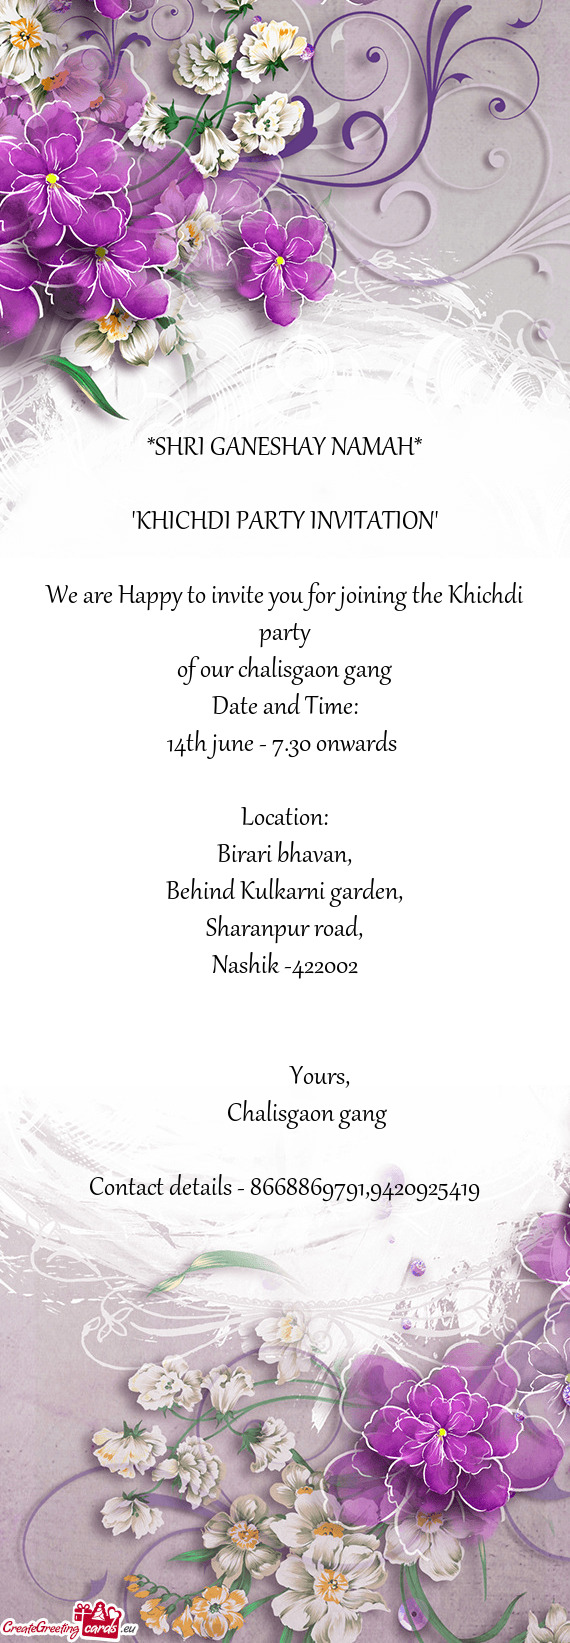 We are Happy to invite you for joining the Khichdi party